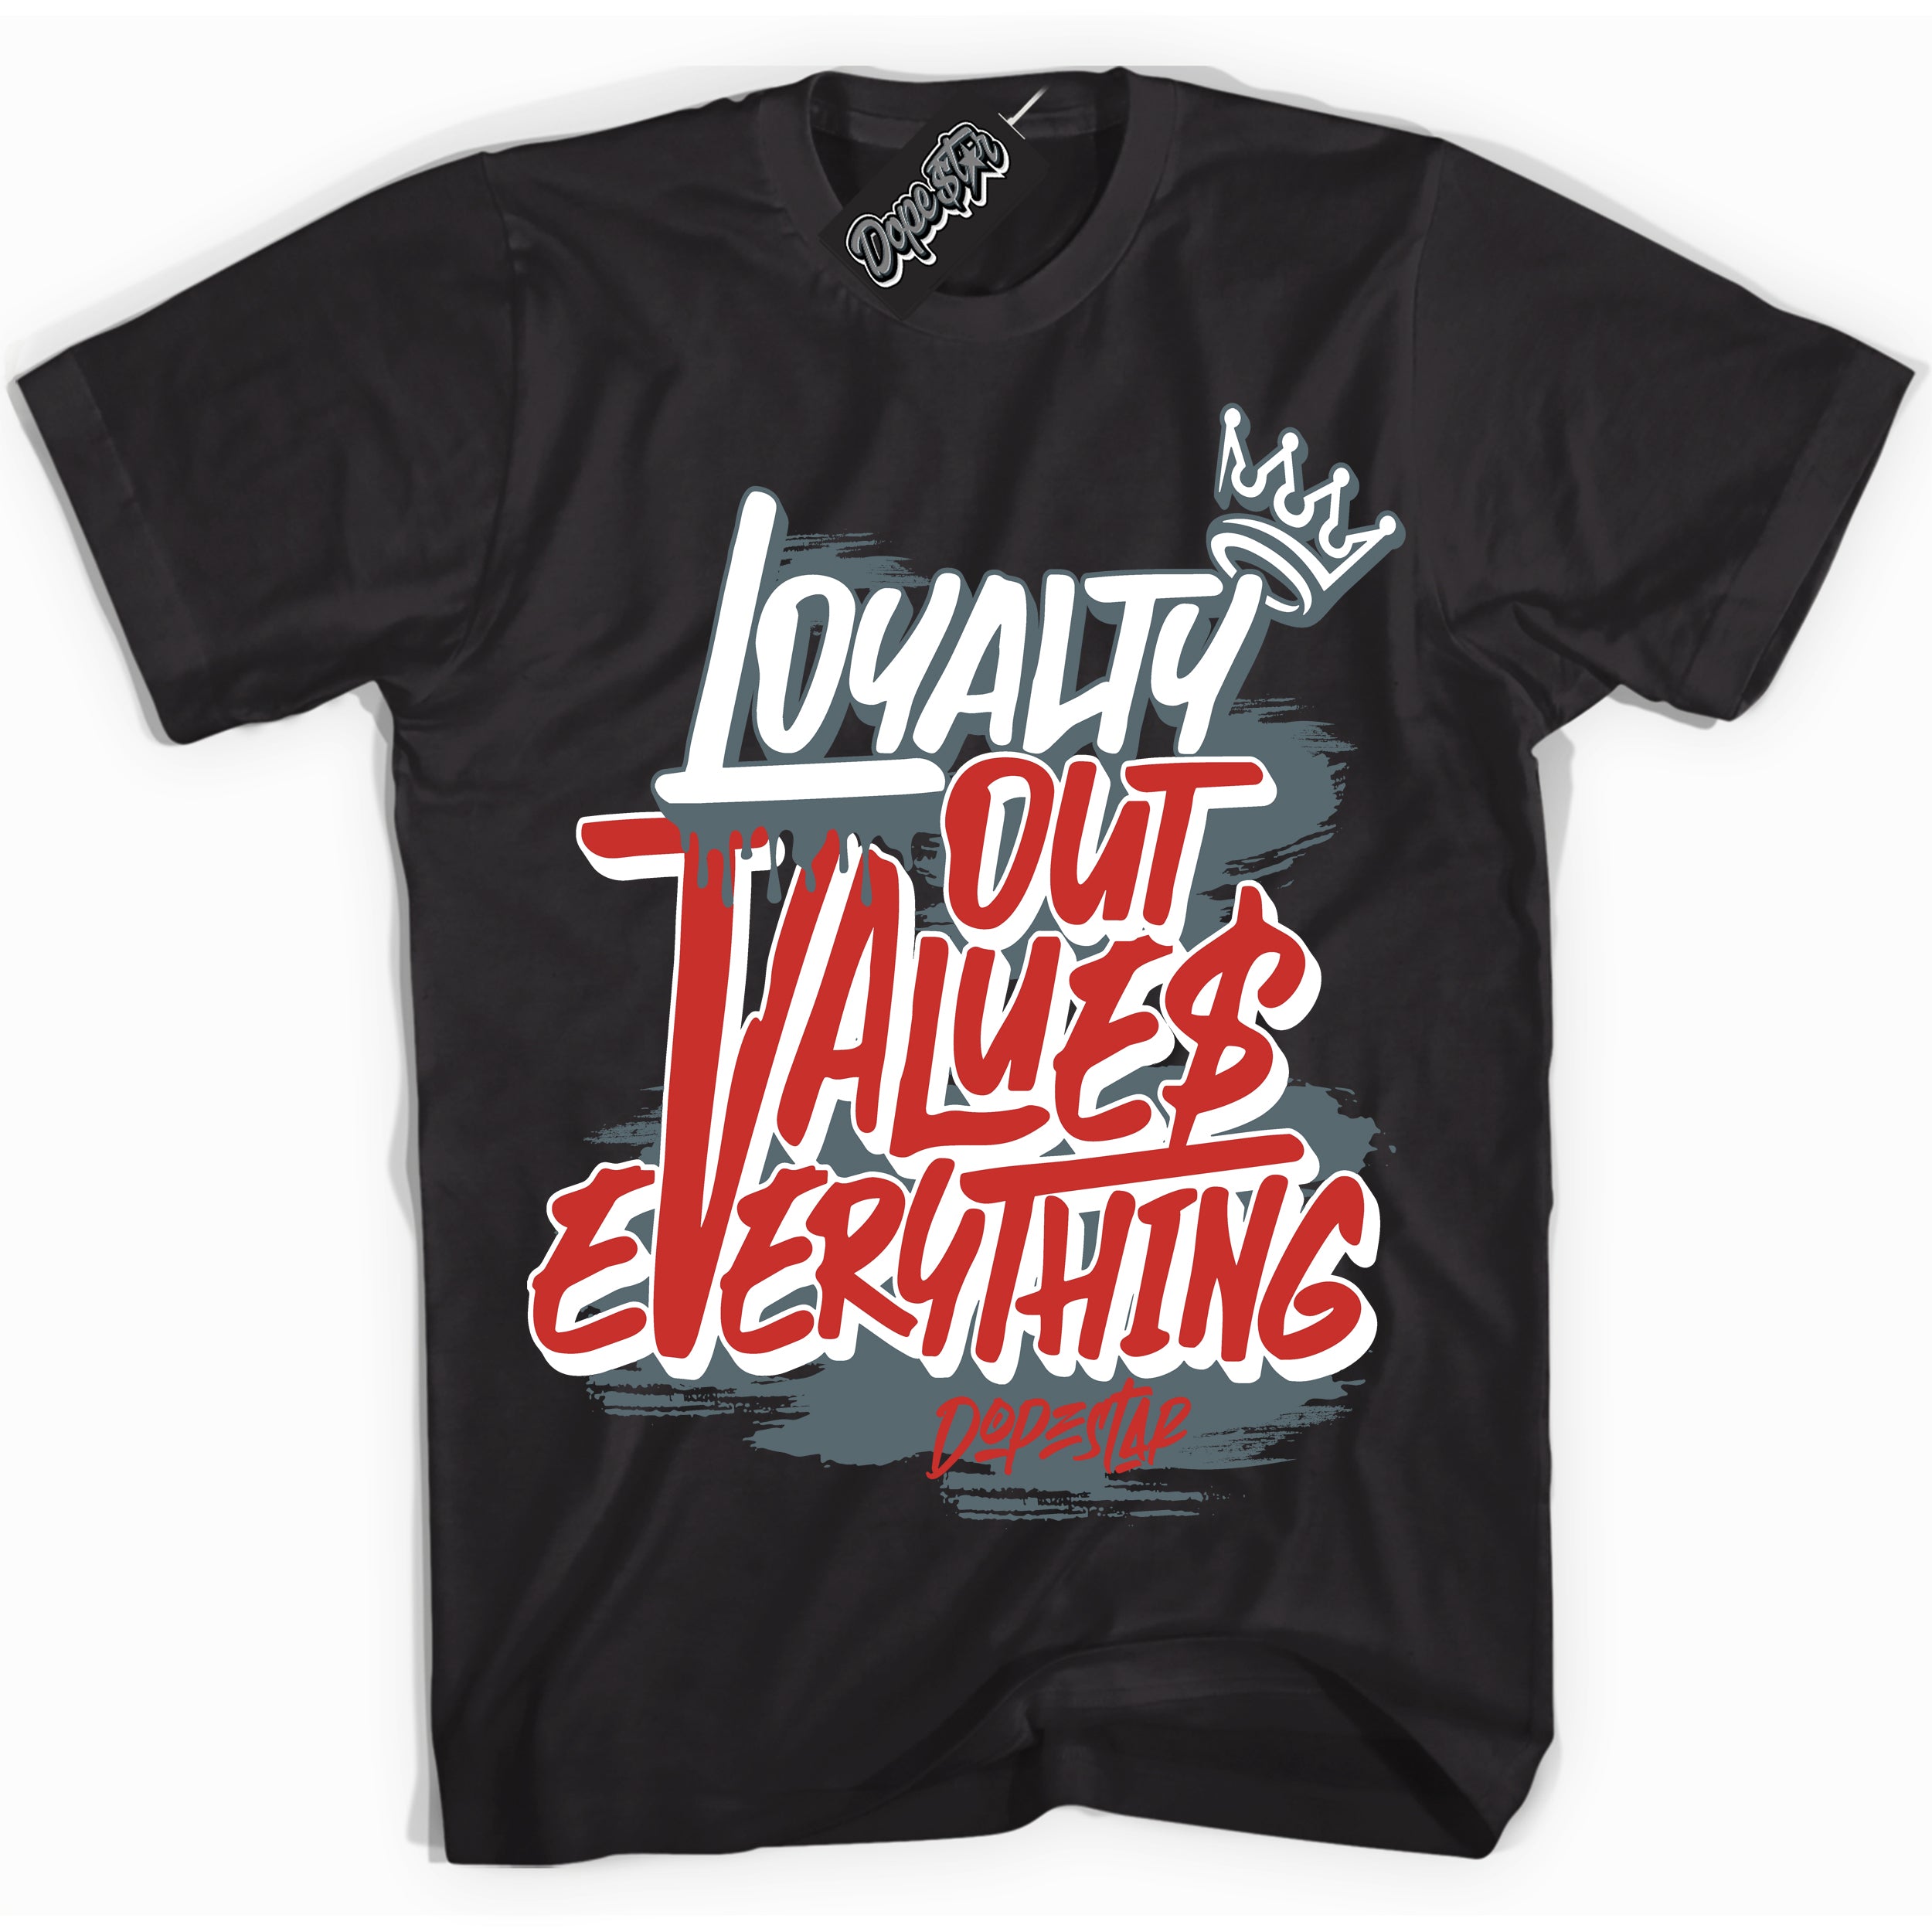 Cool Black Shirt with “ Loyalty Out Values Everything” design that perfectly matches Red Fire 9s Sneakers.